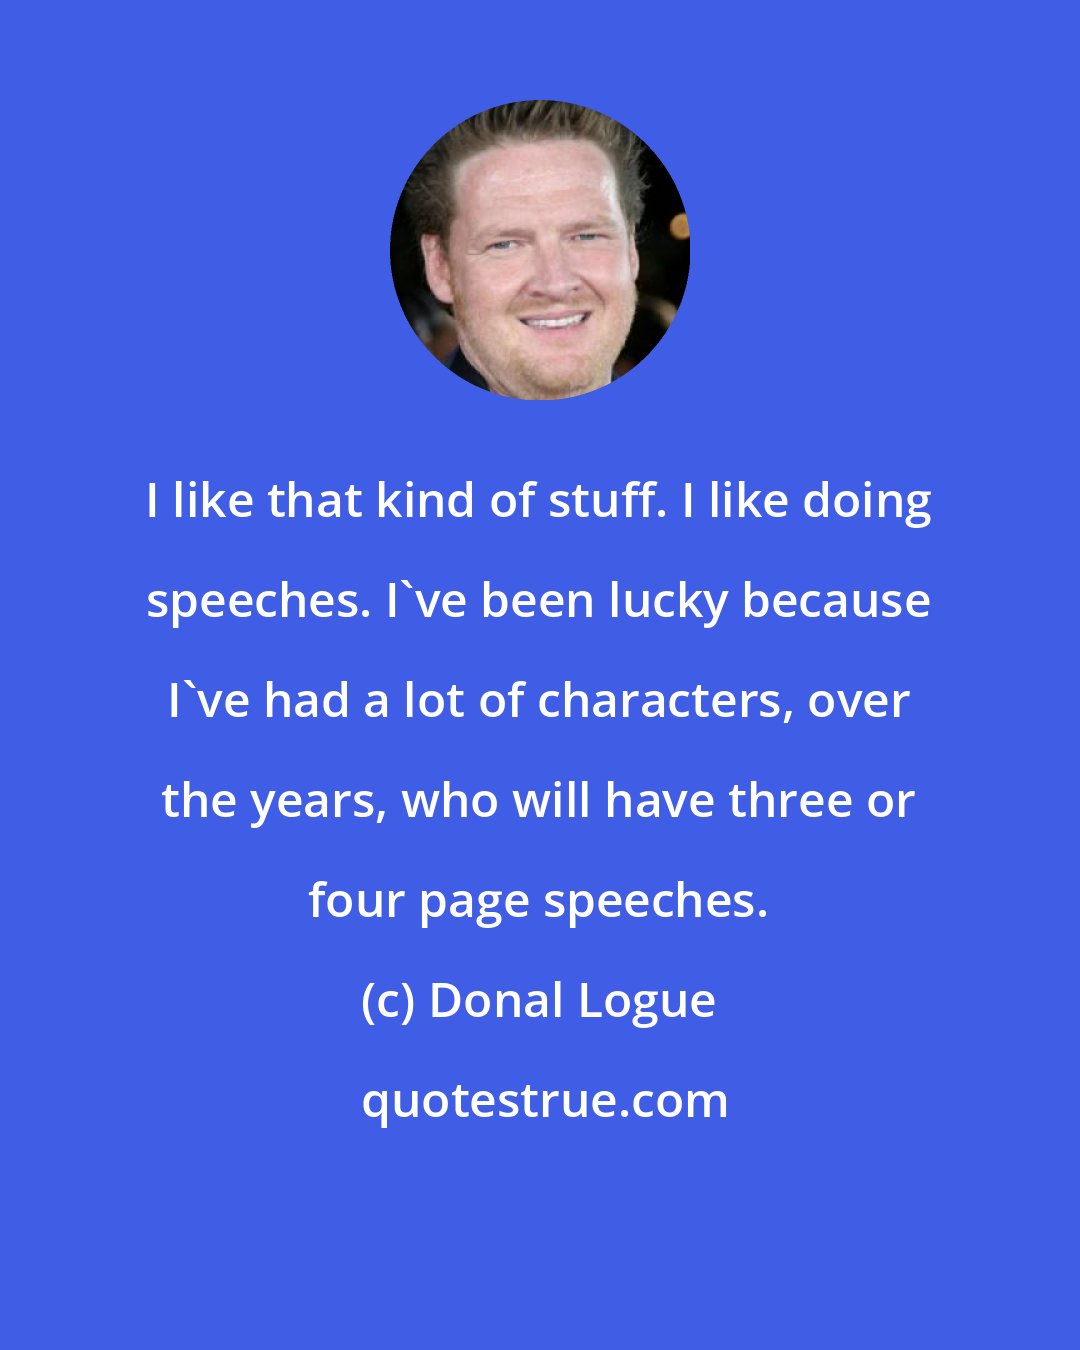 Donal Logue: I like that kind of stuff. I like doing speeches. I've been lucky because I've had a lot of characters, over the years, who will have three or four page speeches.